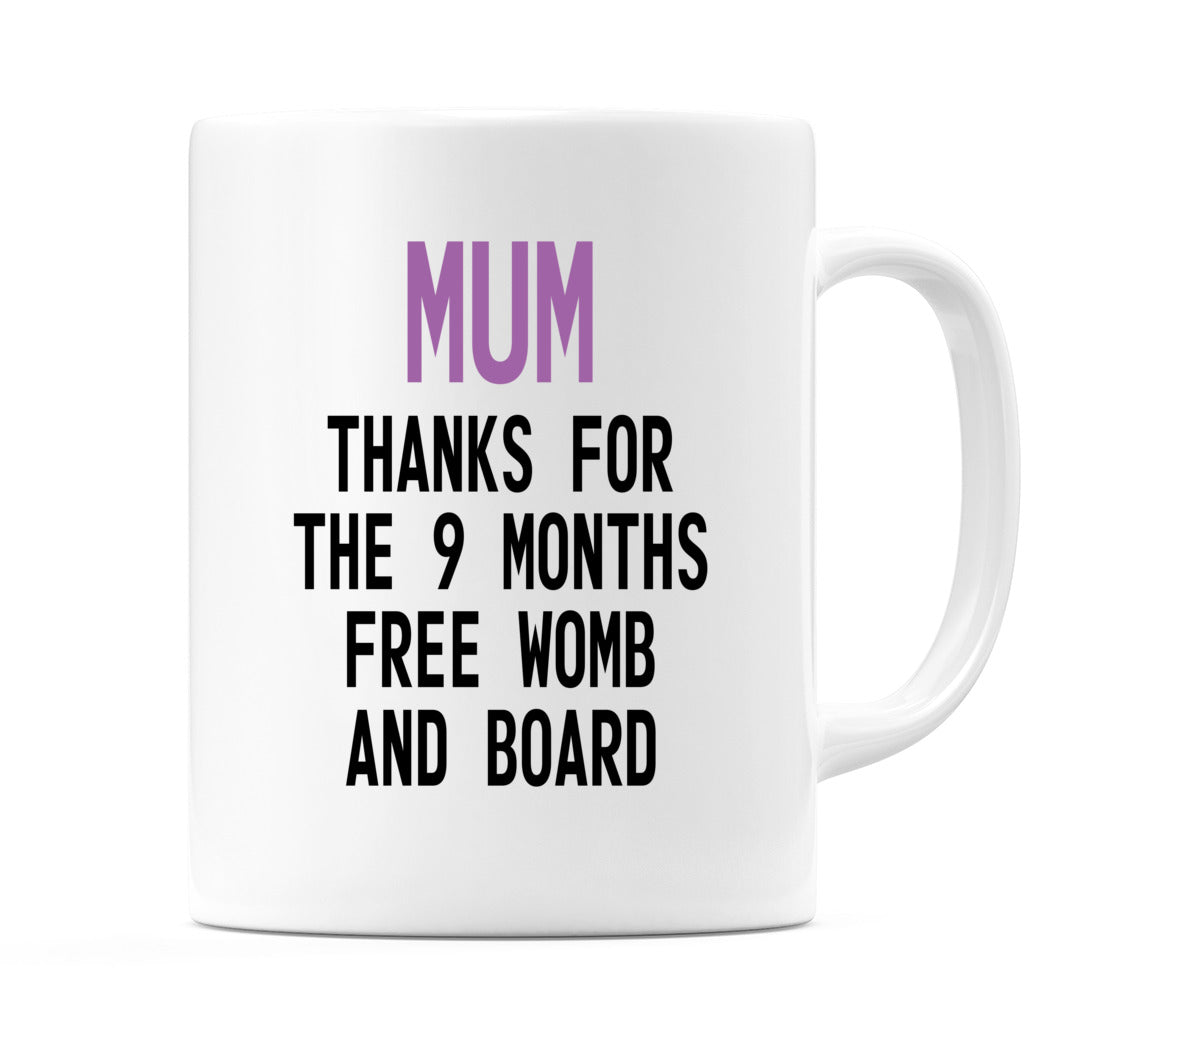 Mum Thanks For The 9 Months Free Womb And Board Mug